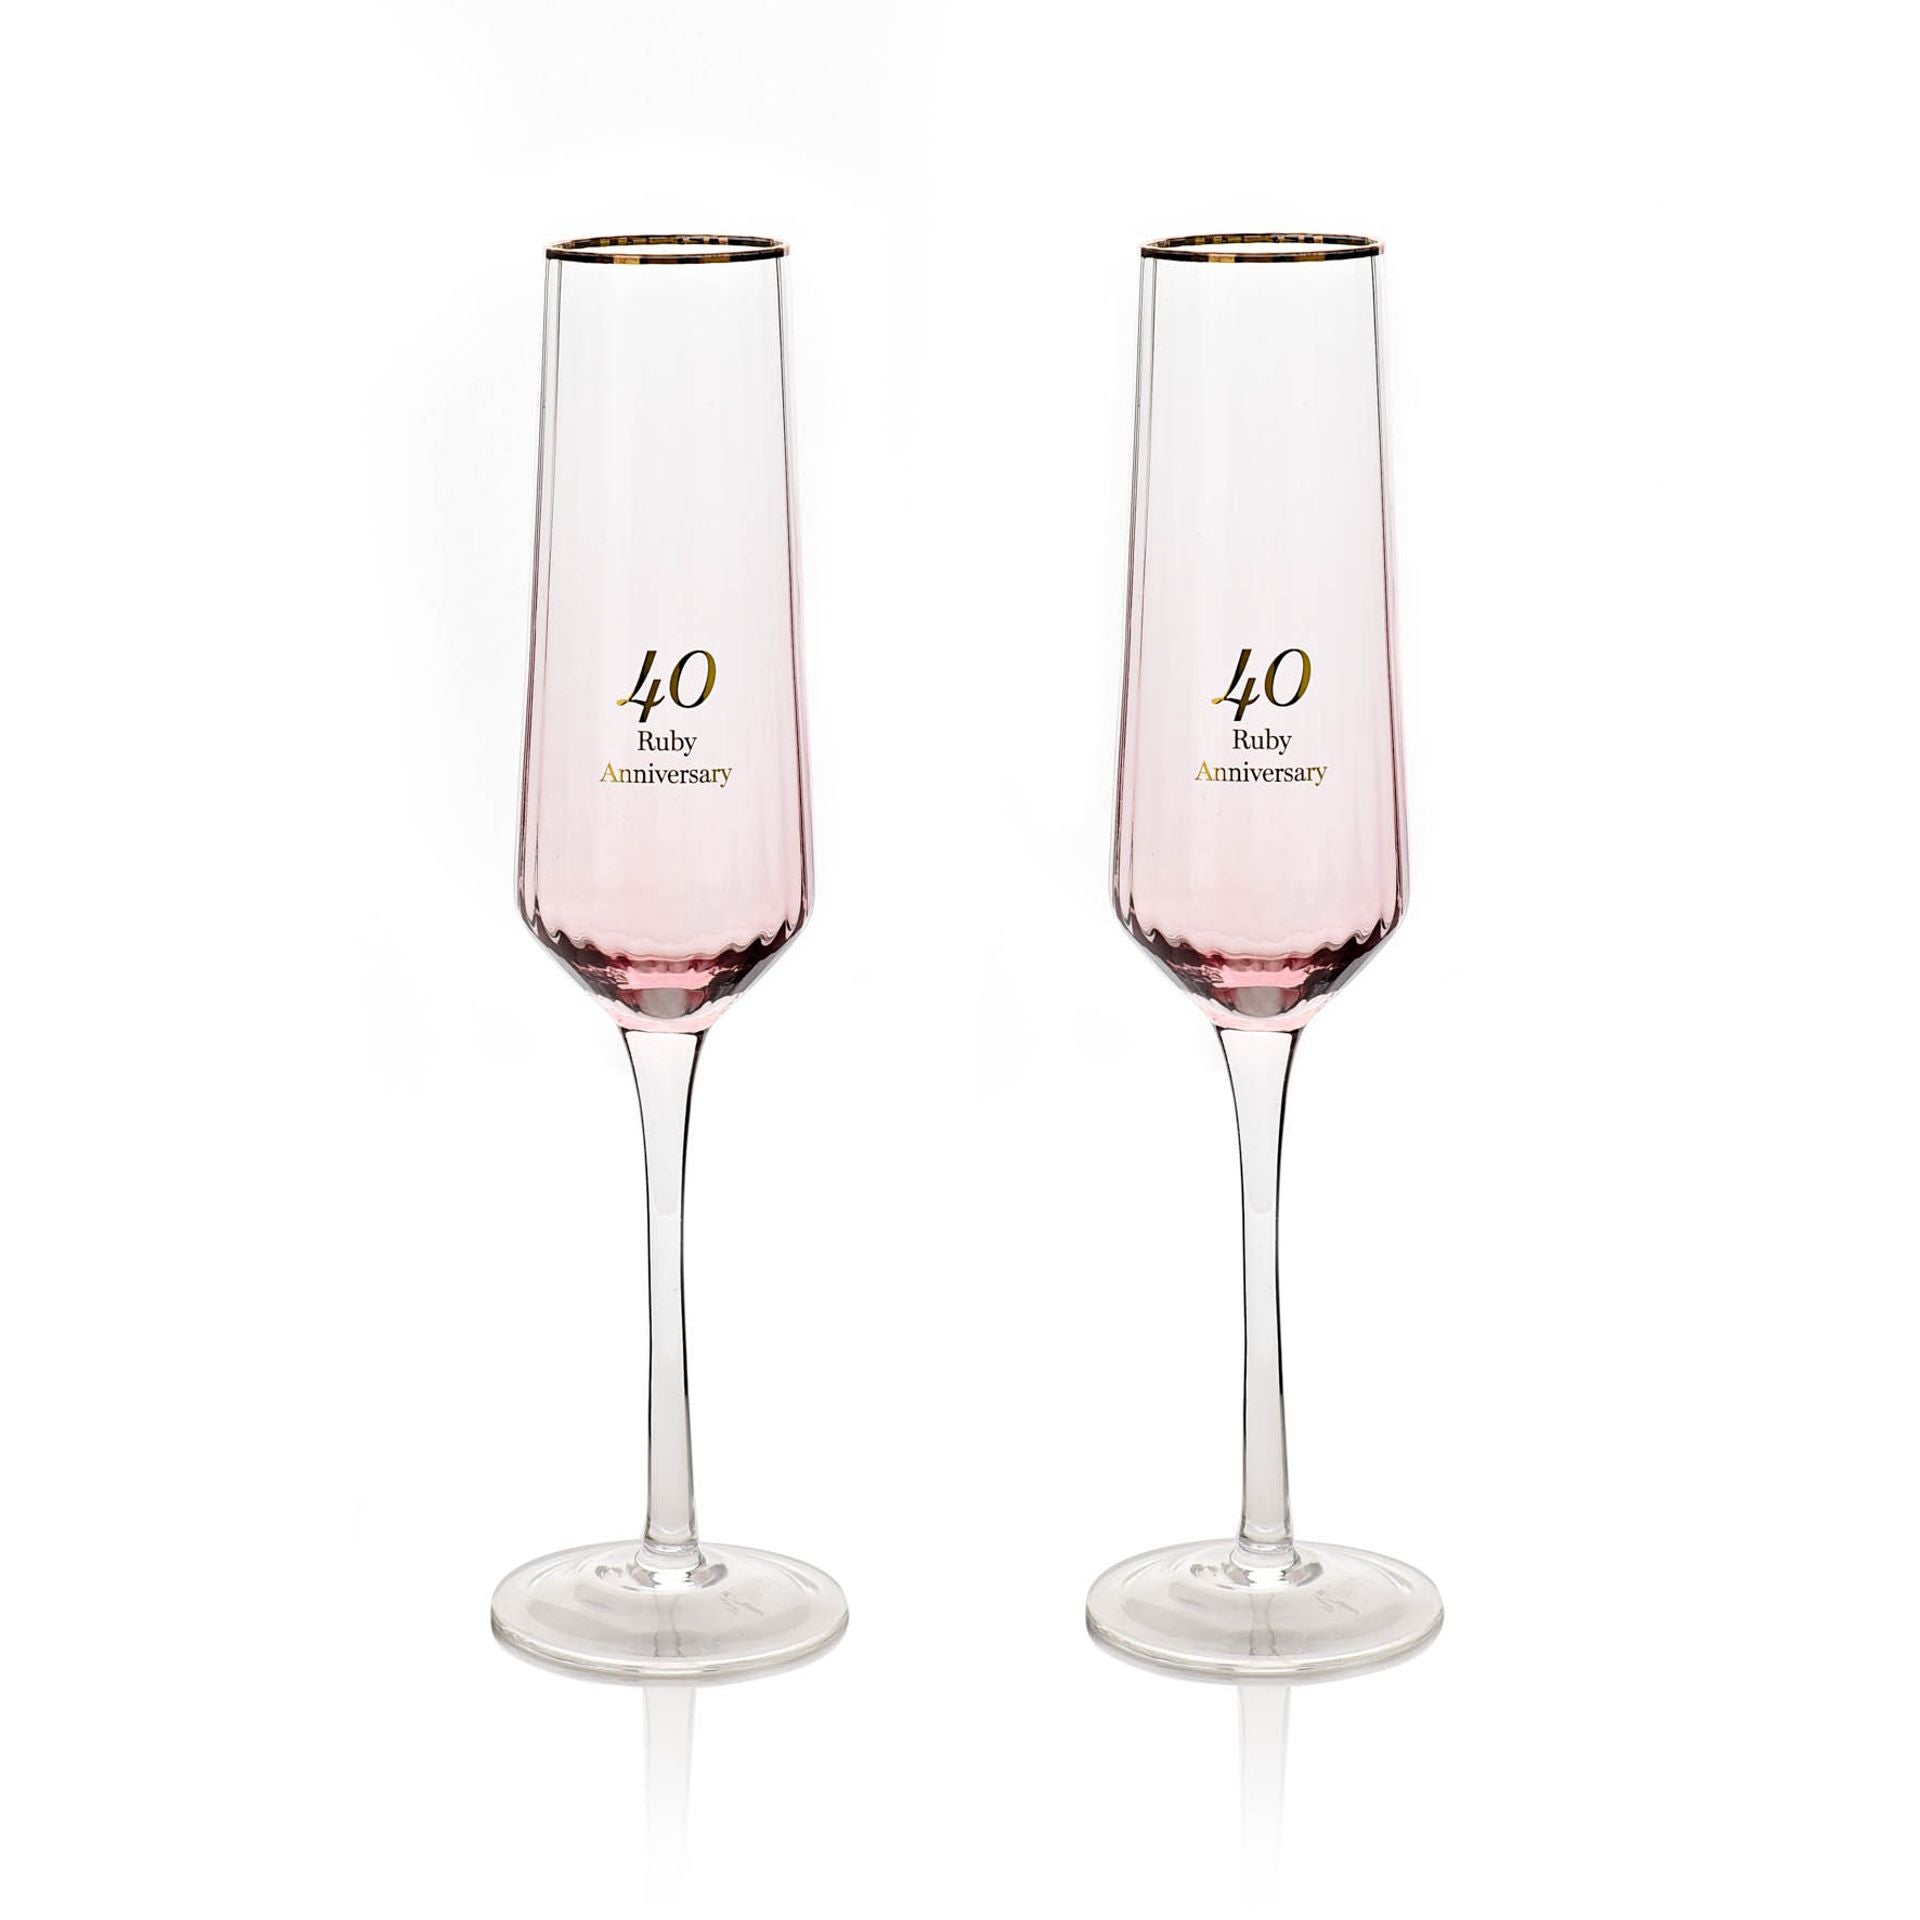 Amore Champagne Flutes Set of 2 - 40th Anniversary - Pink